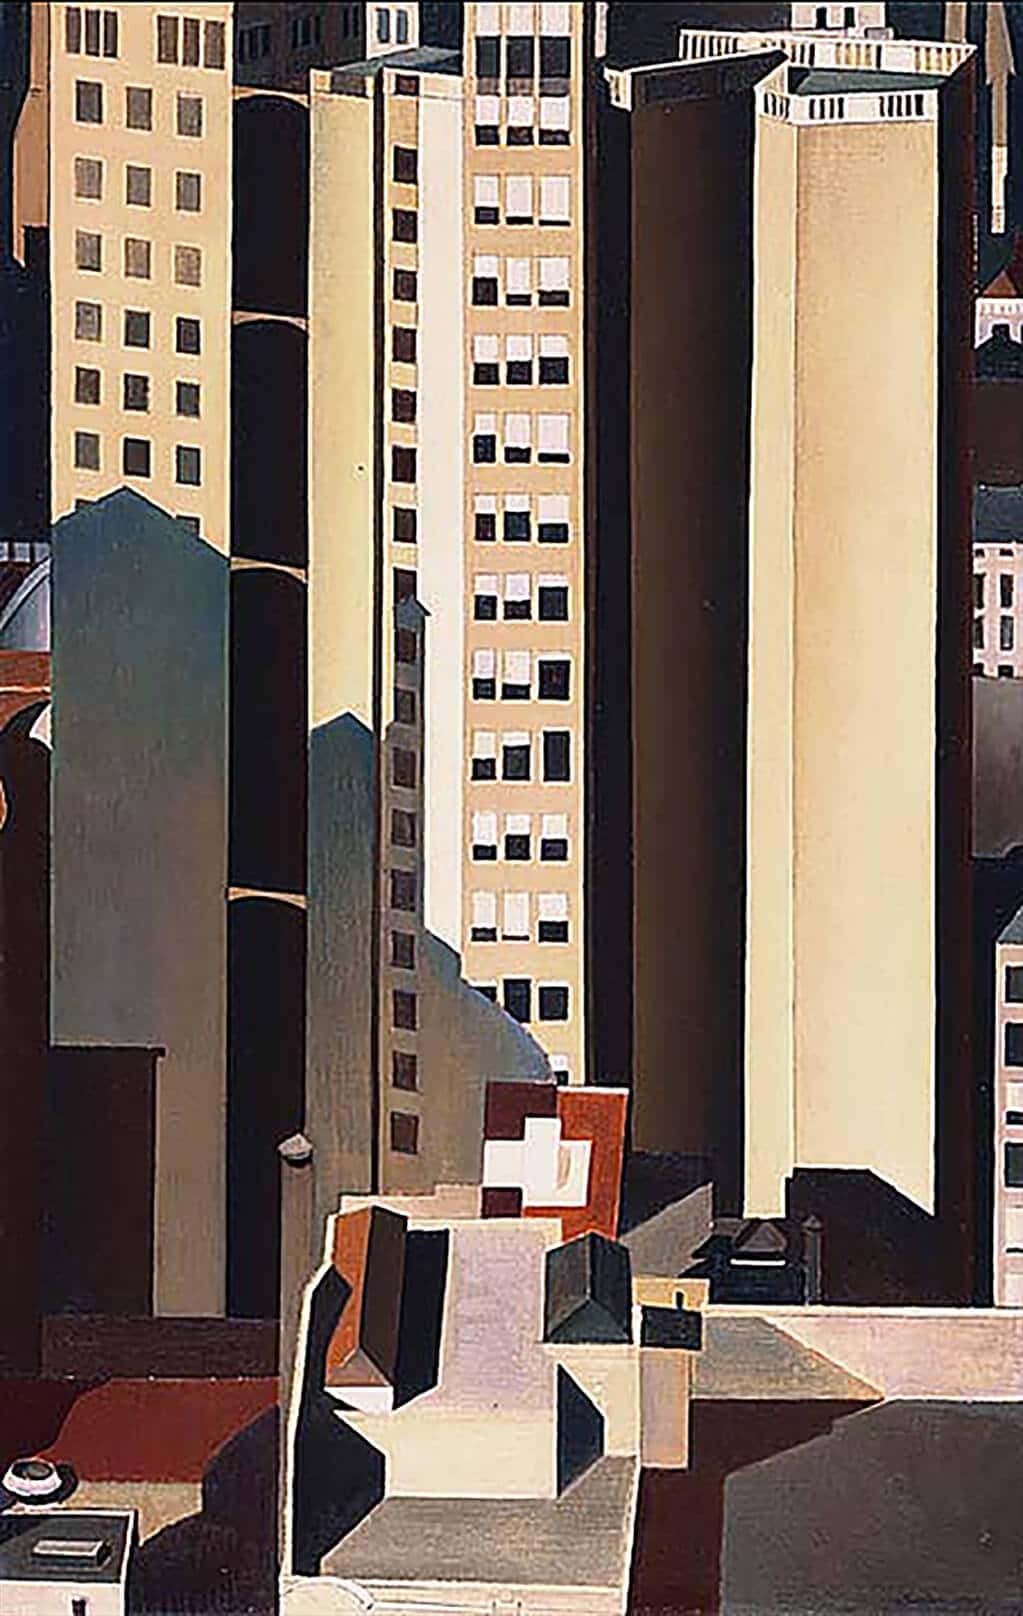 Charles Sheeler: Skyscrapers (1922); The Phillips Collection, Washington